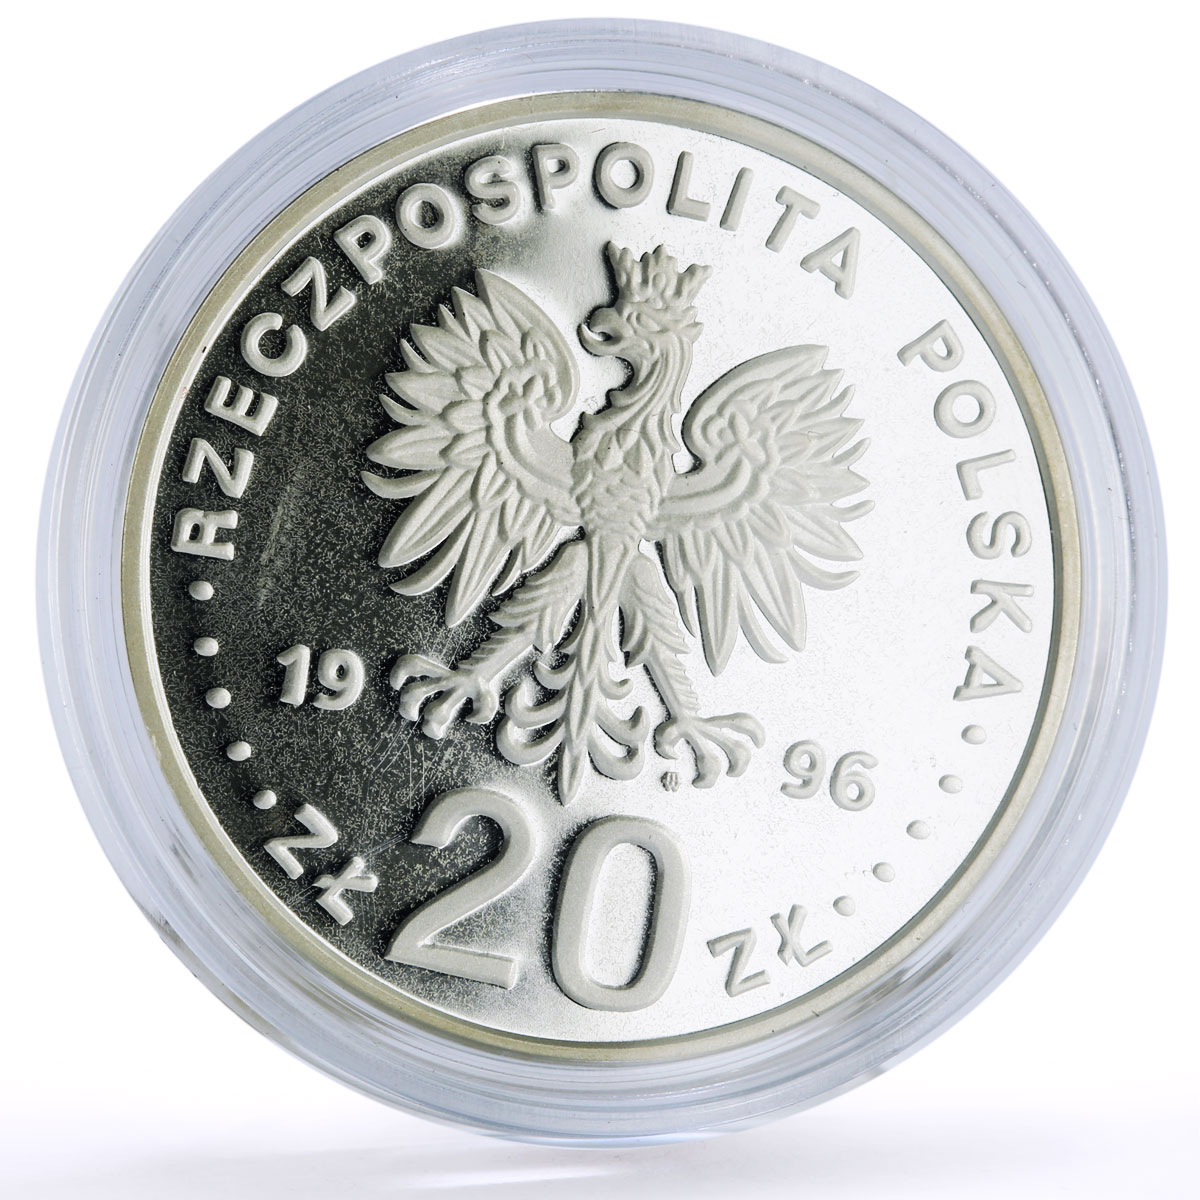 Poland 20 zlotych Warsaw 400th Anniversary Architecture proof silver coin 1996